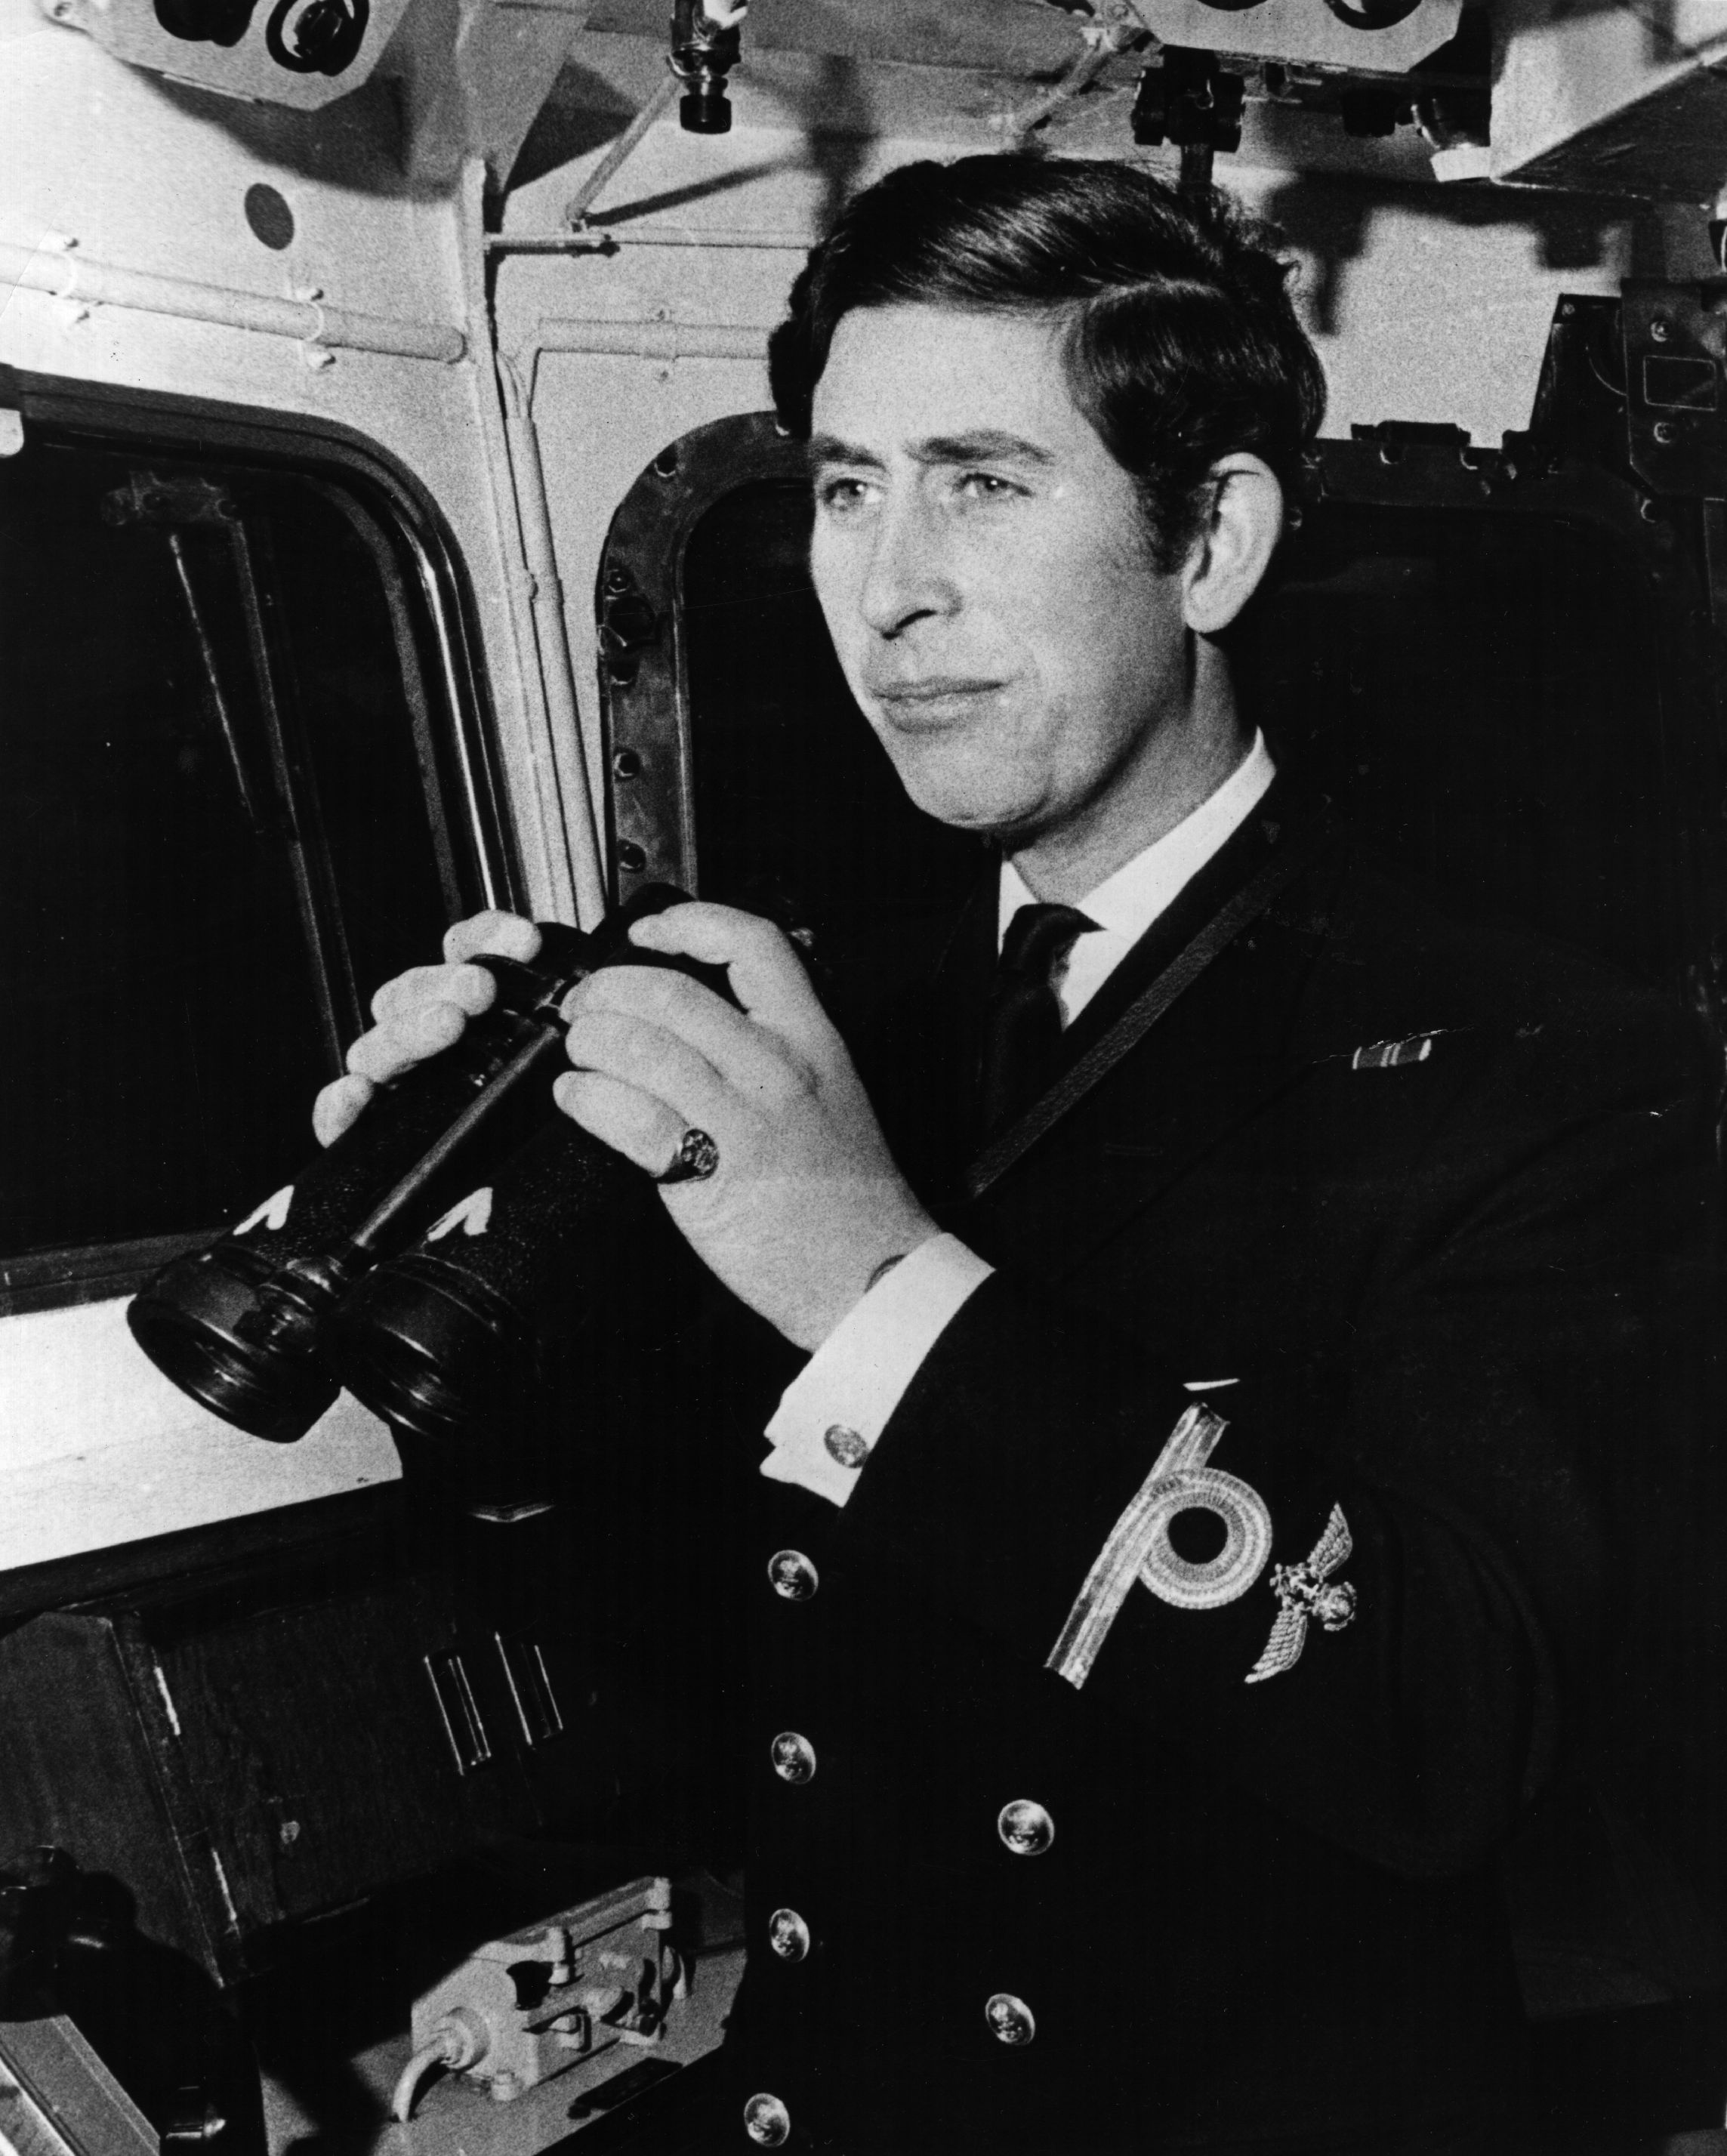 Prince Charles serving as a sub-lieutenant on the bridge of a Royal Navy Frigate, Minerva before setting sail on routine patrols and exercises around the West Indies on February 12, 1973 | Source: Getty Images